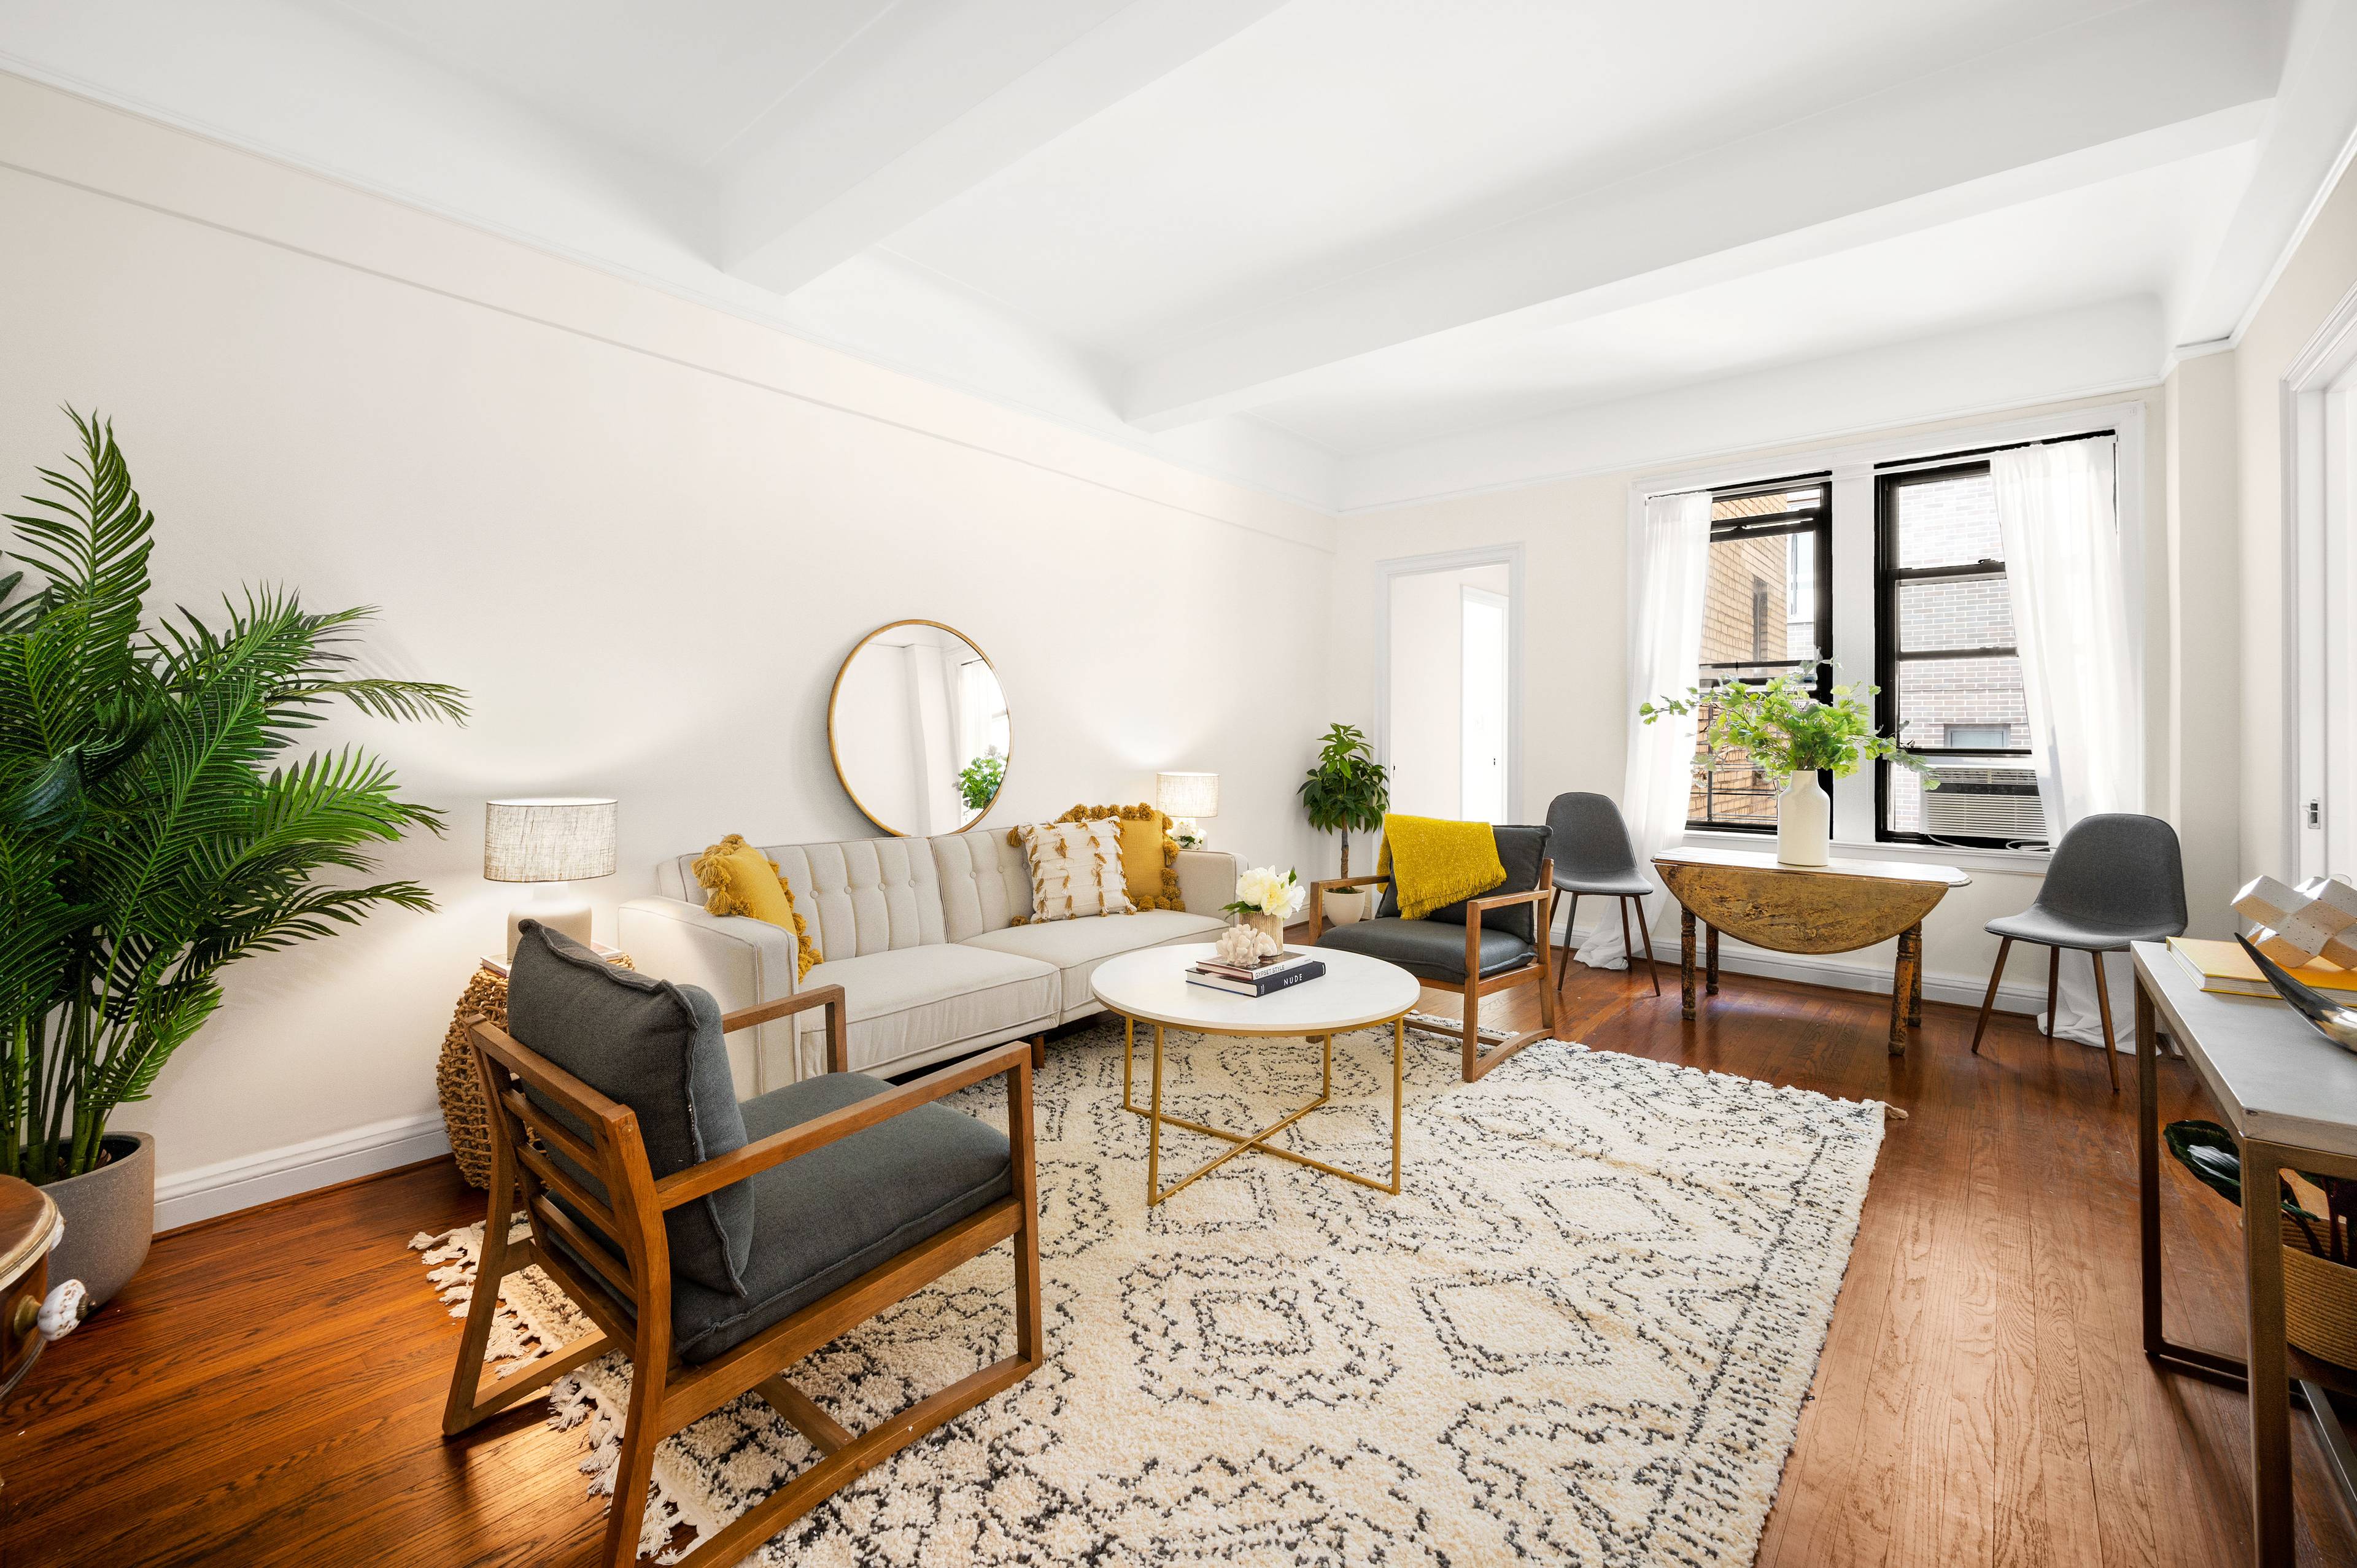 Welcome home to this sophisticated one bedroom, one bath Upper East Side pre war co op apartment in a full service building.